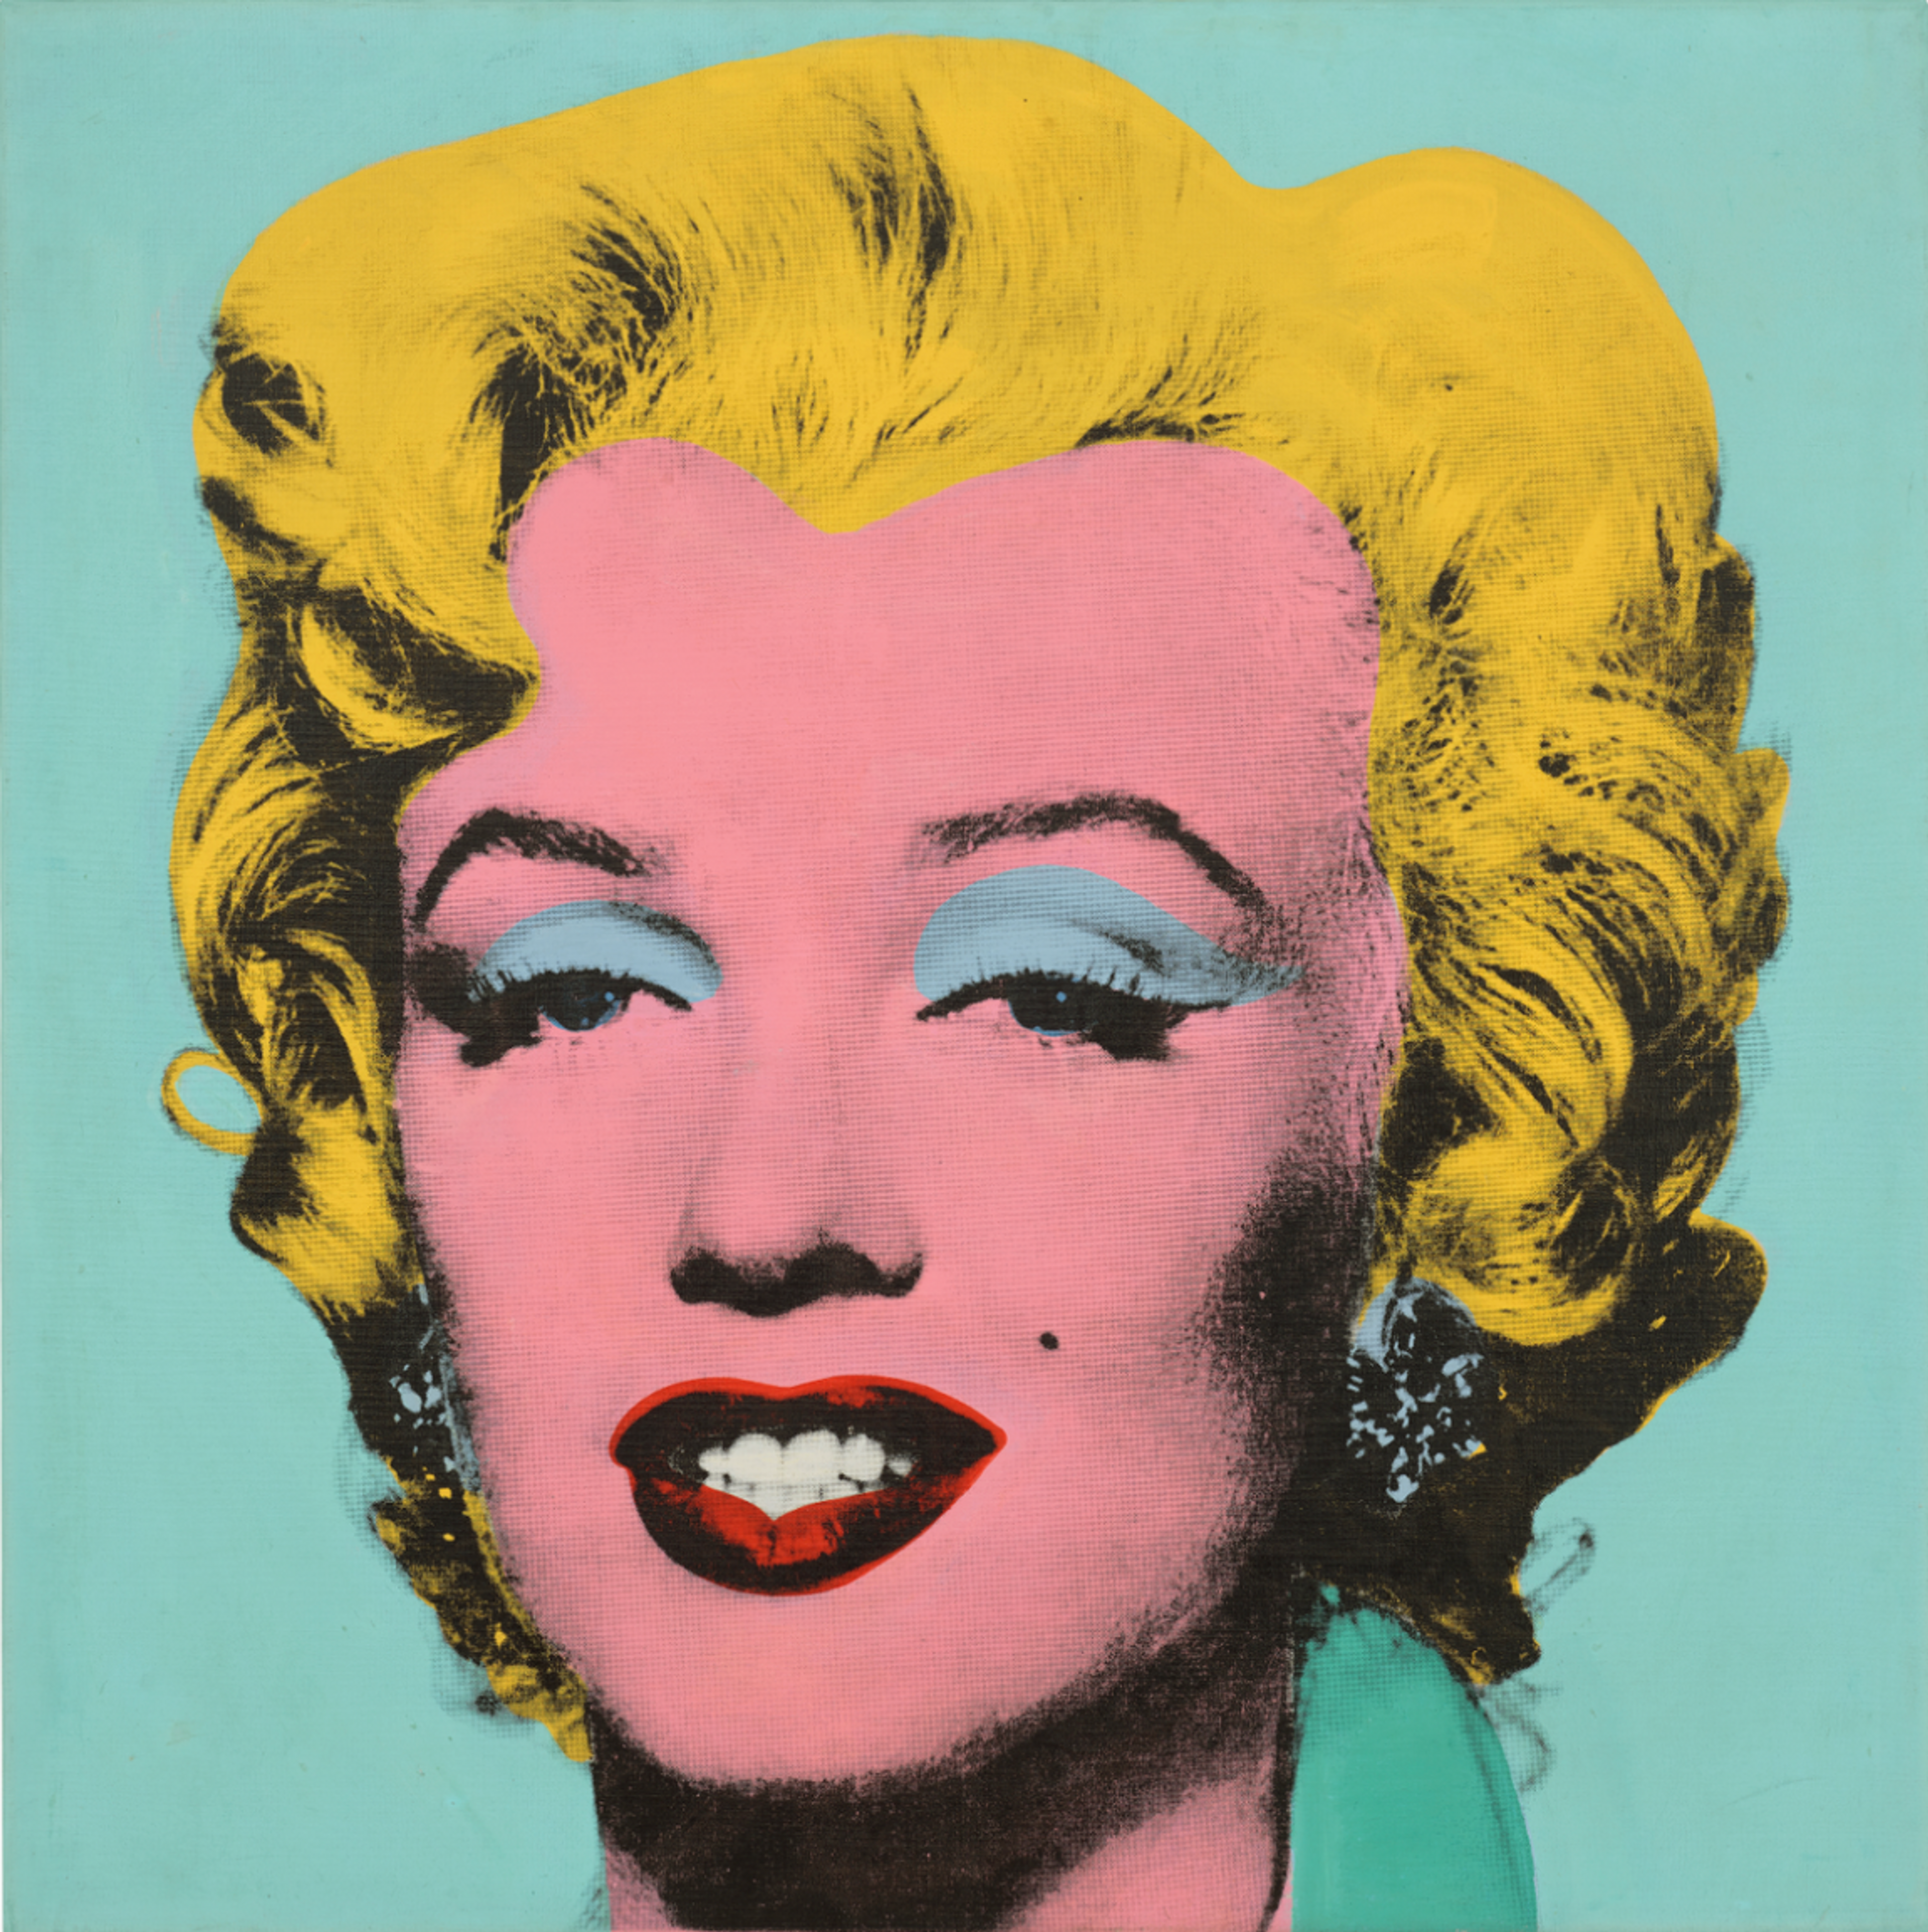 Andy Warhol's 'Shot Sage Blue Marilyn': The Most Expensive Artwork at Auction?